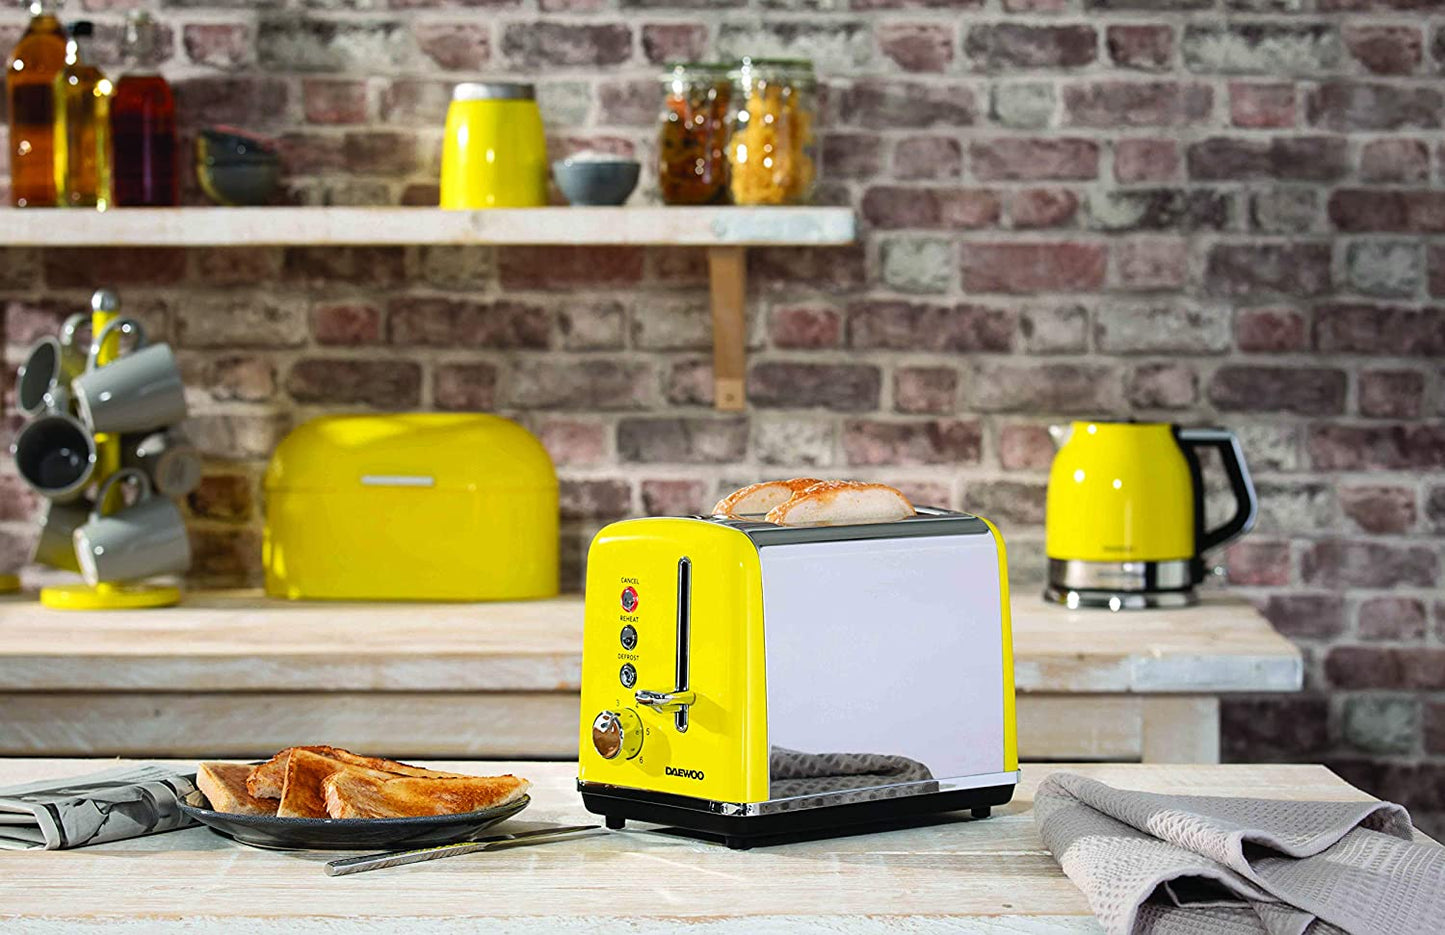 Daewoo Electric Yellow and Grey Stainless Steel 2 Slice Toaster Soho (SDA1996)